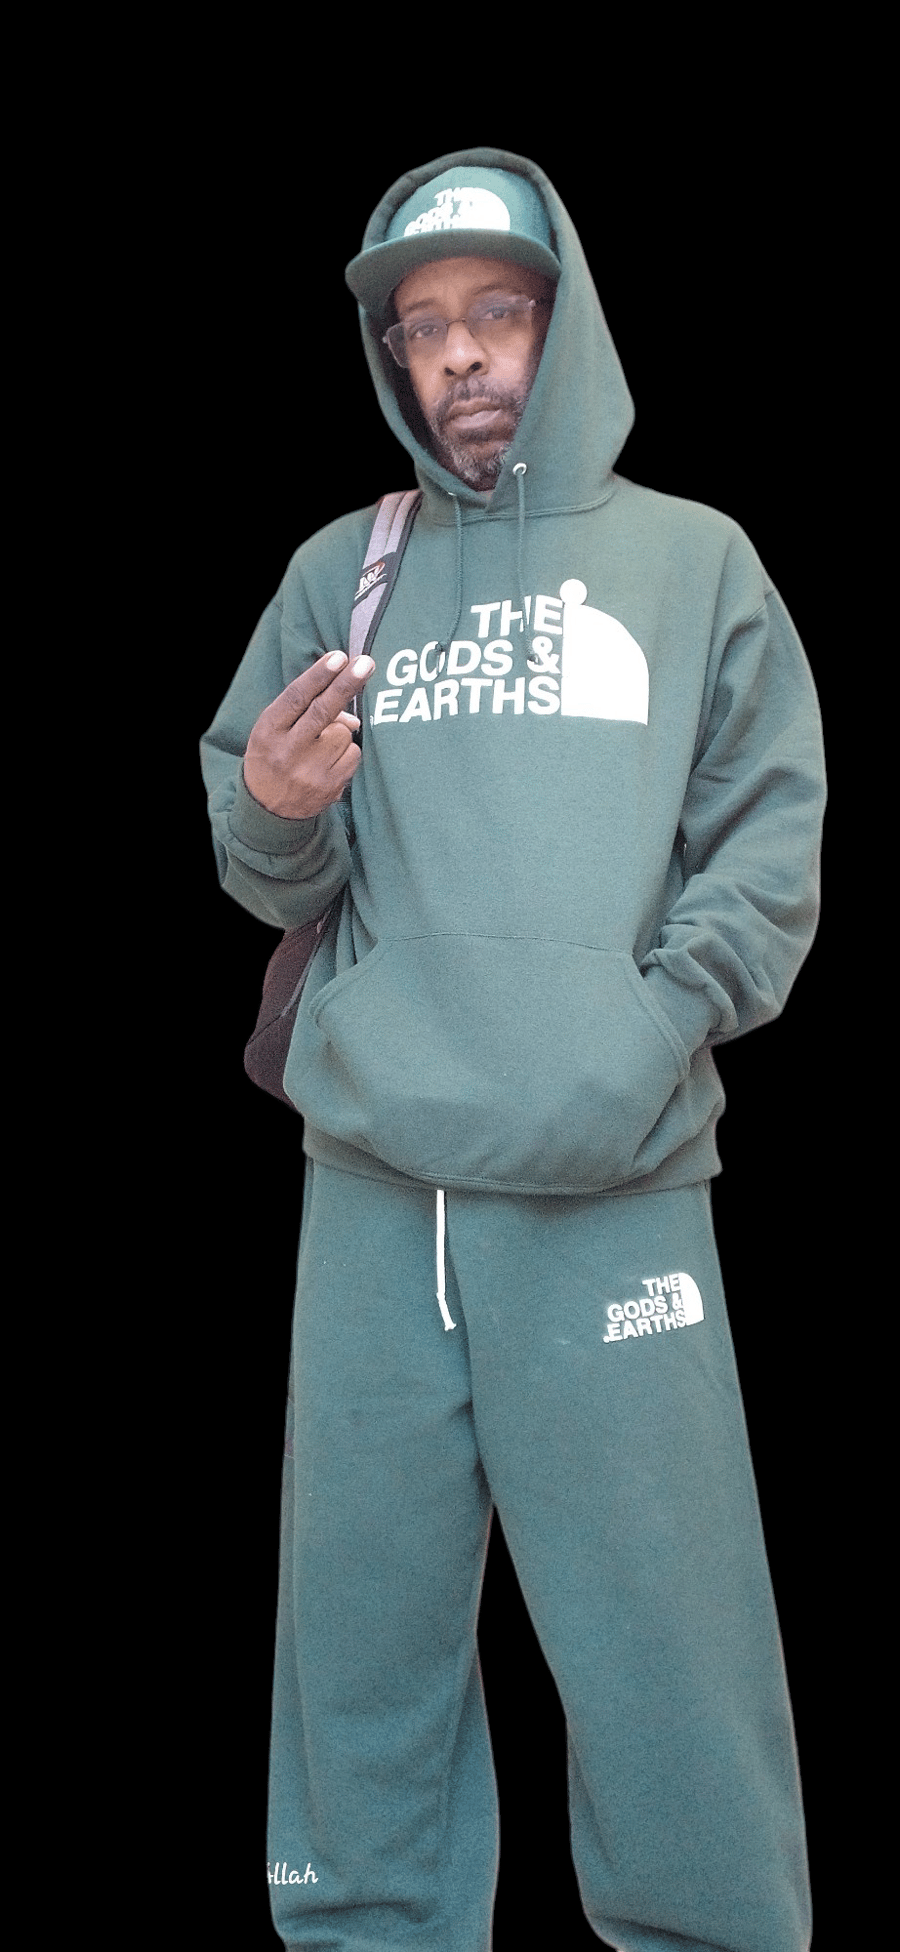 Image of The Gods And Earths PullOver Hoodie,/FullZip Hoodie/Crewneck Lightweight Sweatsuit 